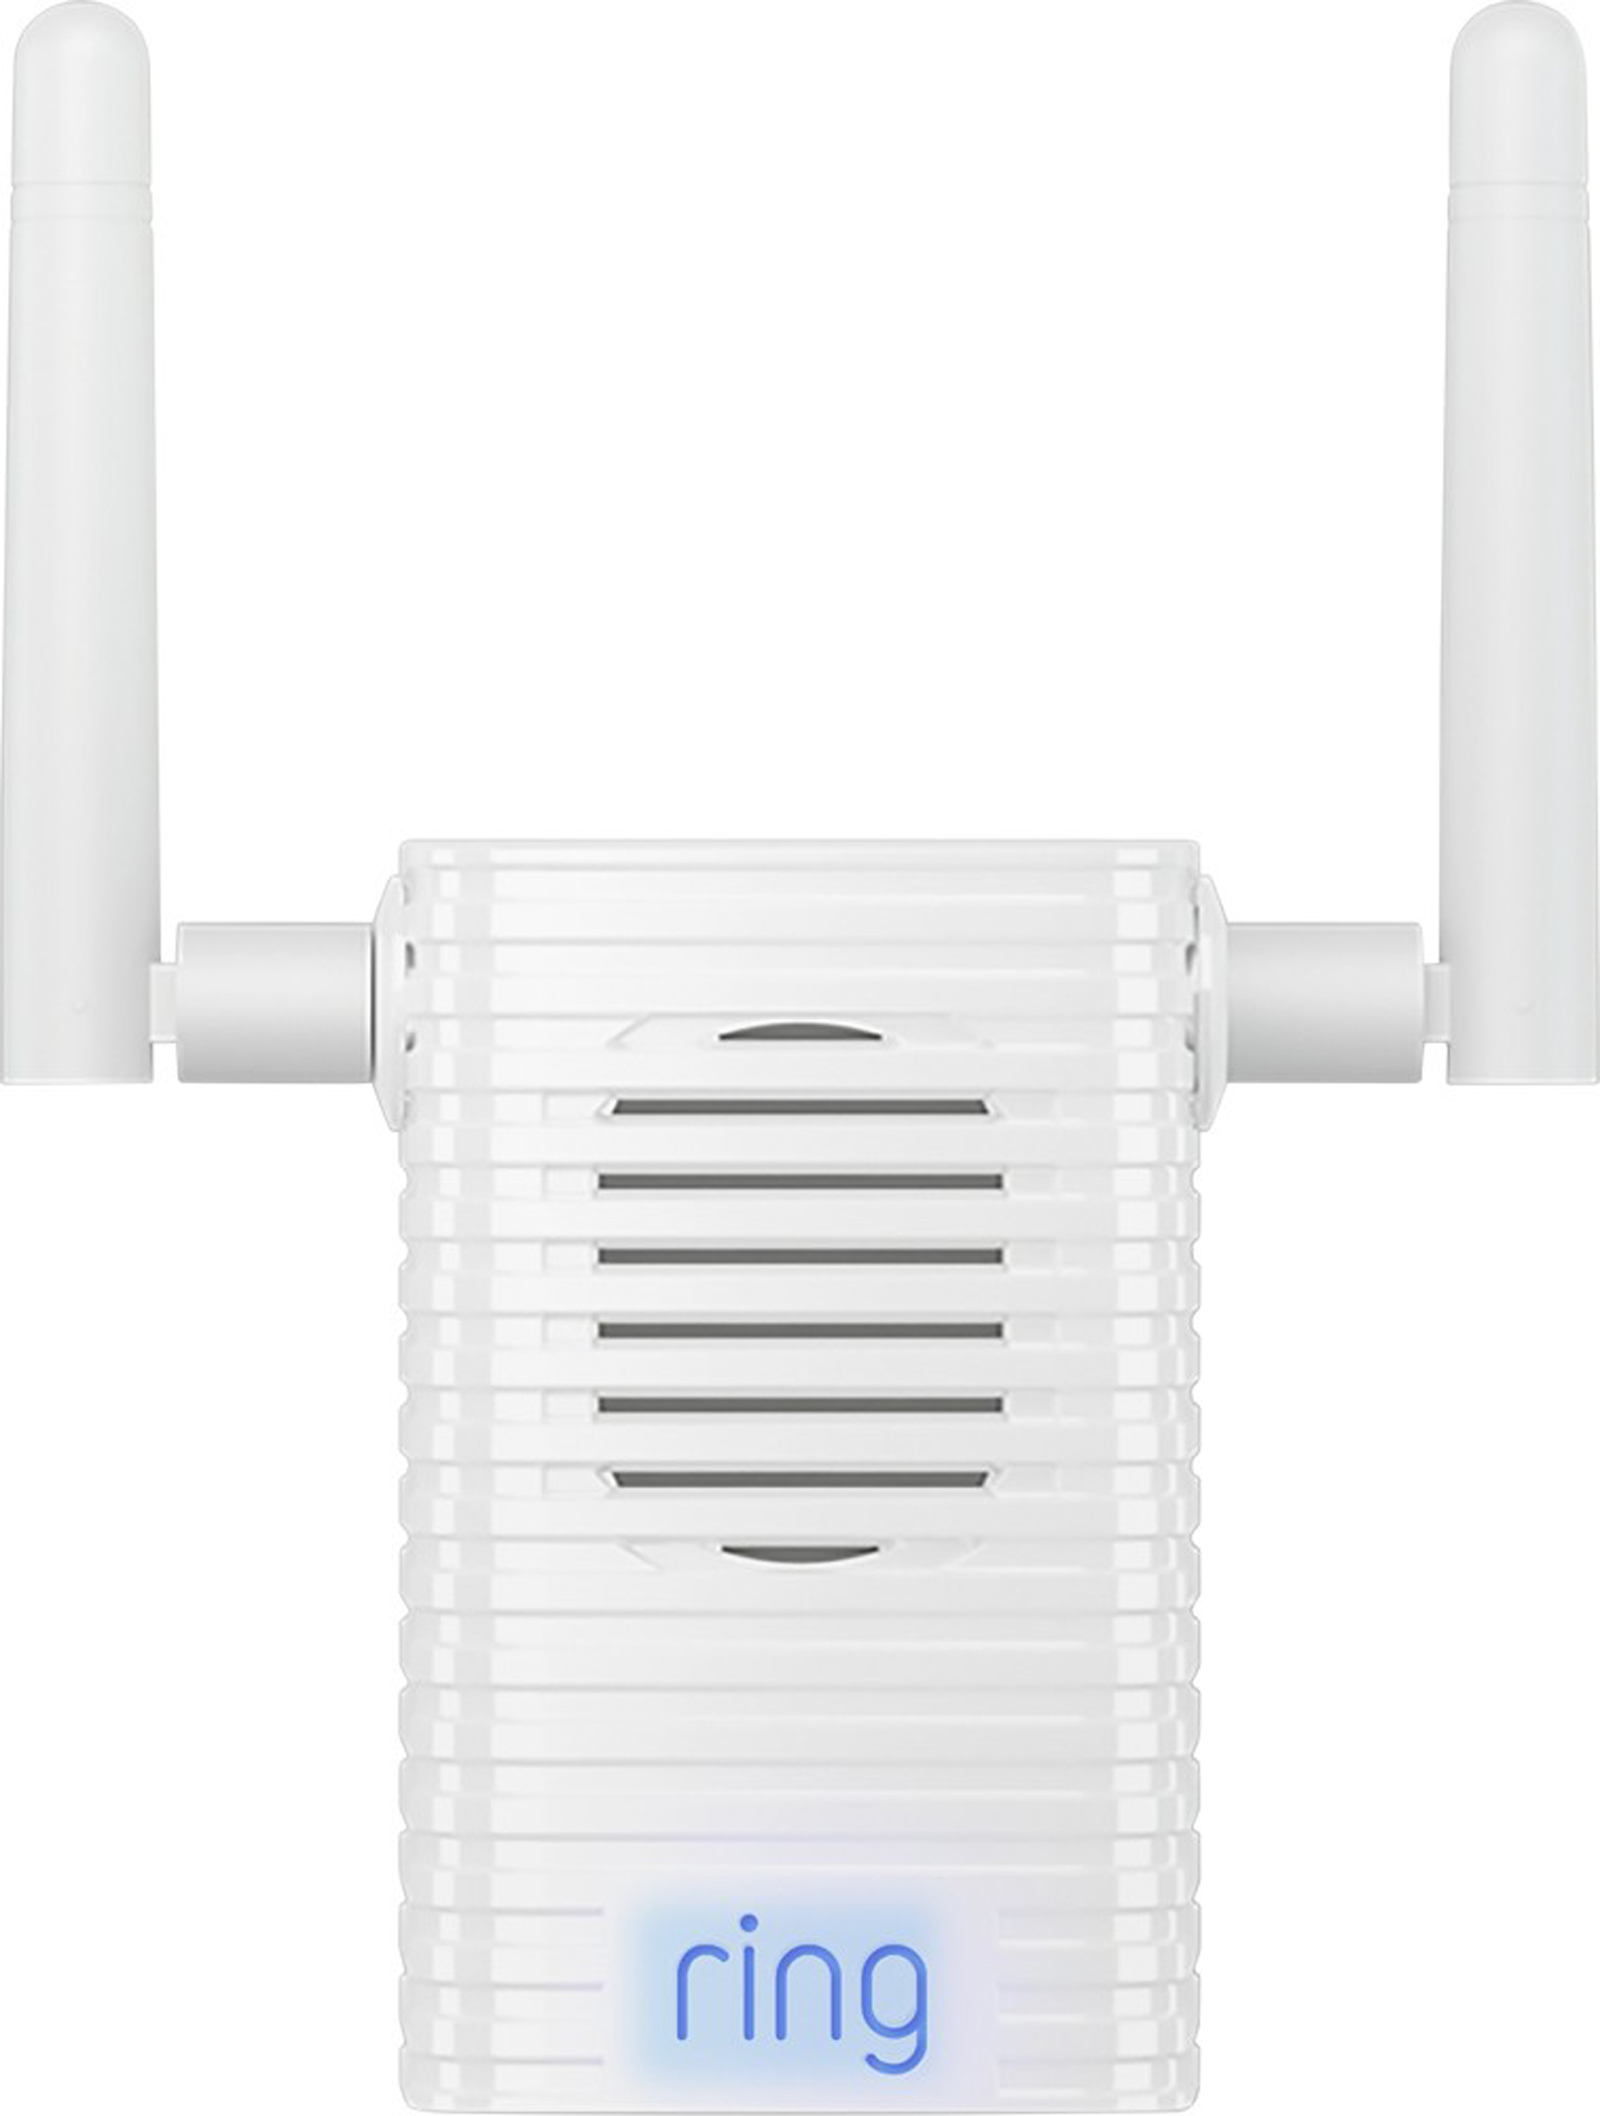 ring Chime Pro WiFi Extender and Indoor Chime for Devices White